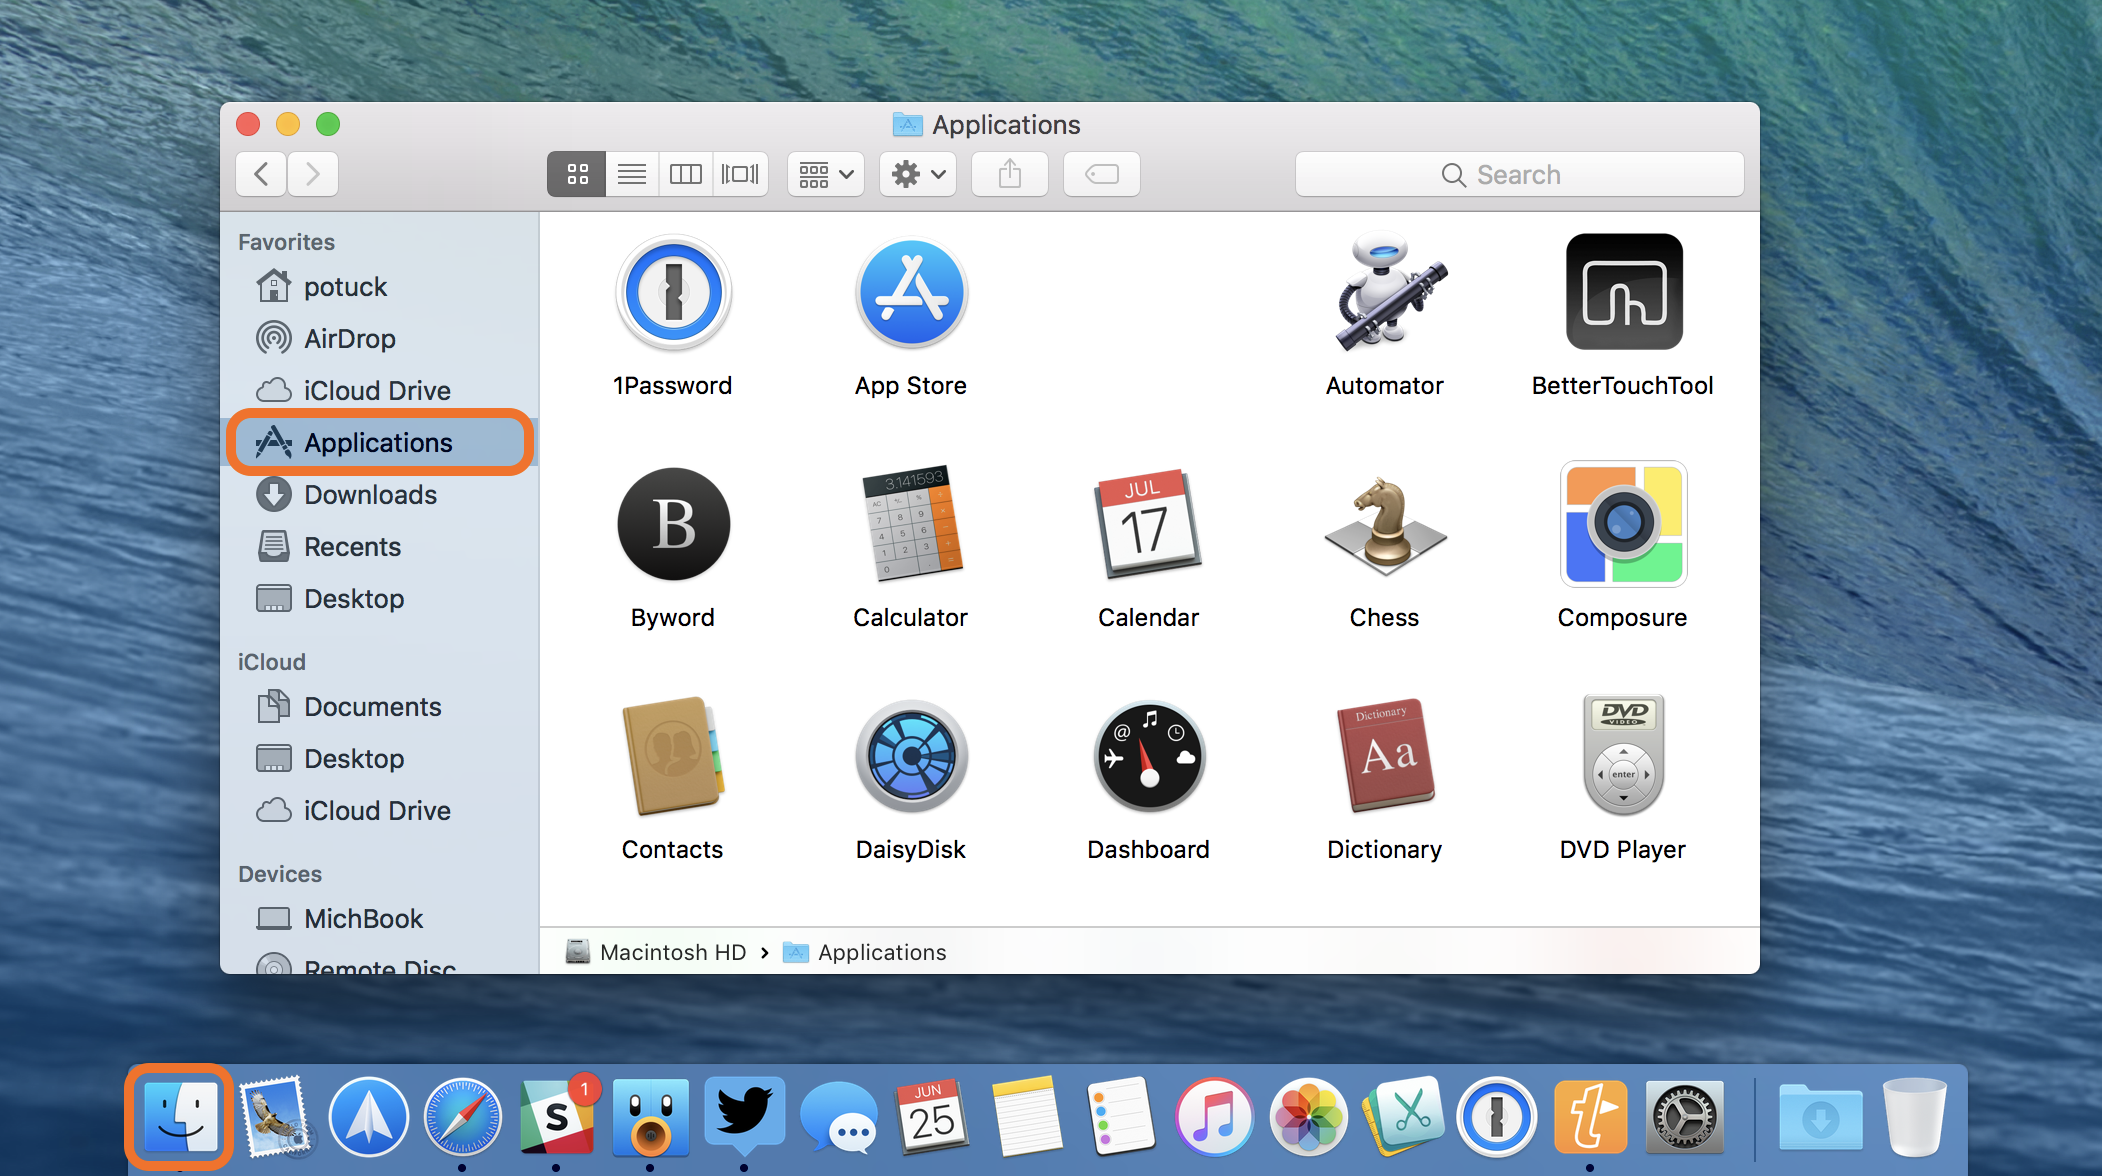 How to delete apps on macbook air